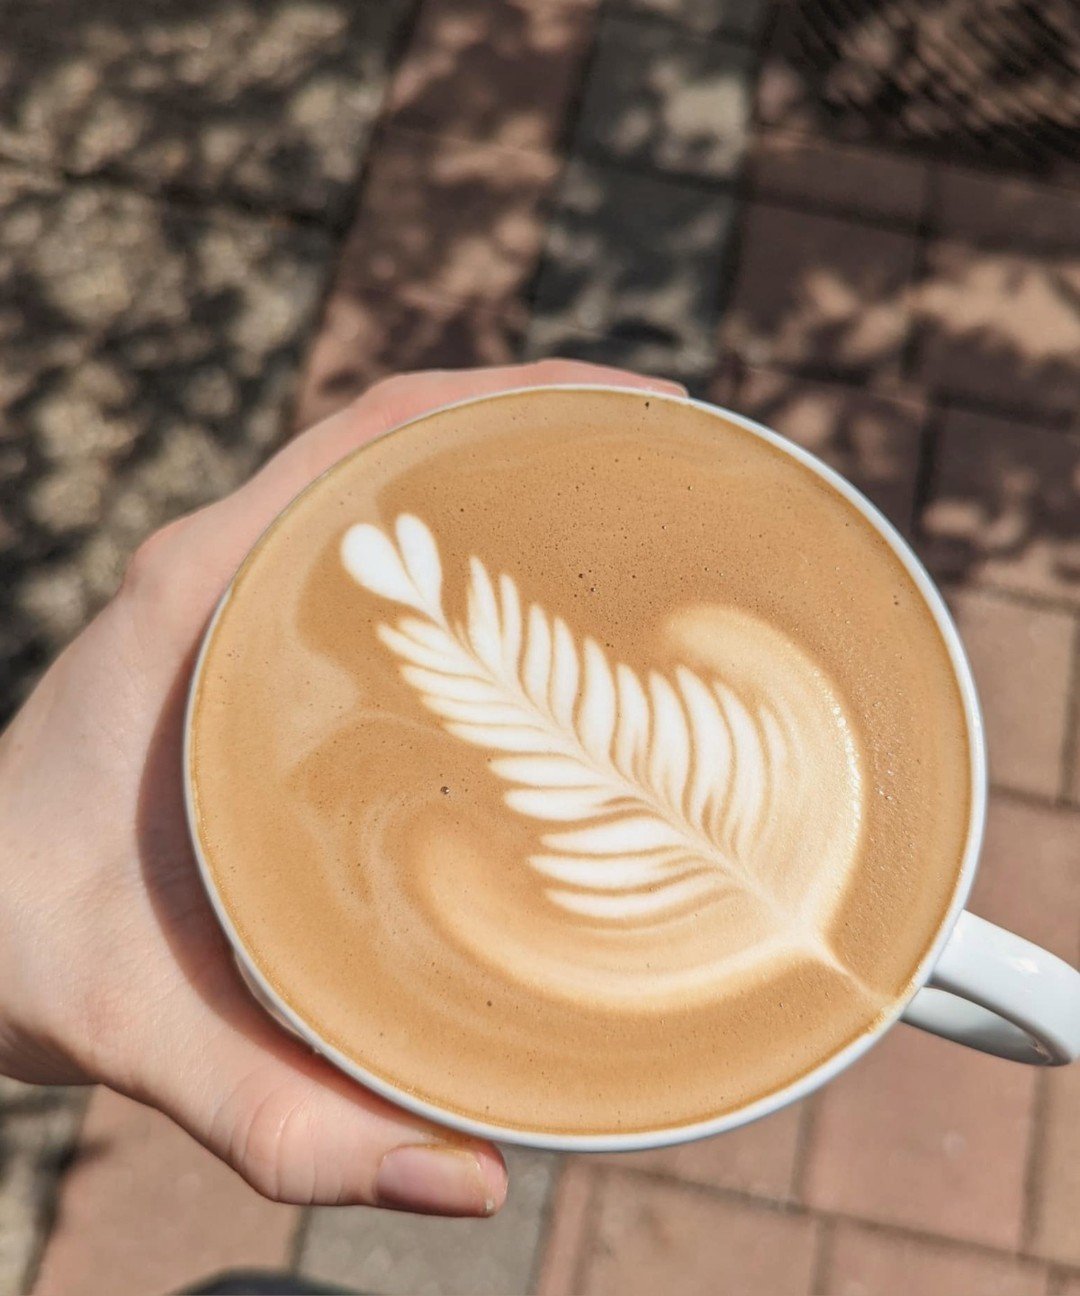 Need a pick-me-up during your wedding week? Swing by Kent Java Bar in downtown Corydon for a delicious cup of coffee! ☕🤍

Image via @kentjavabar